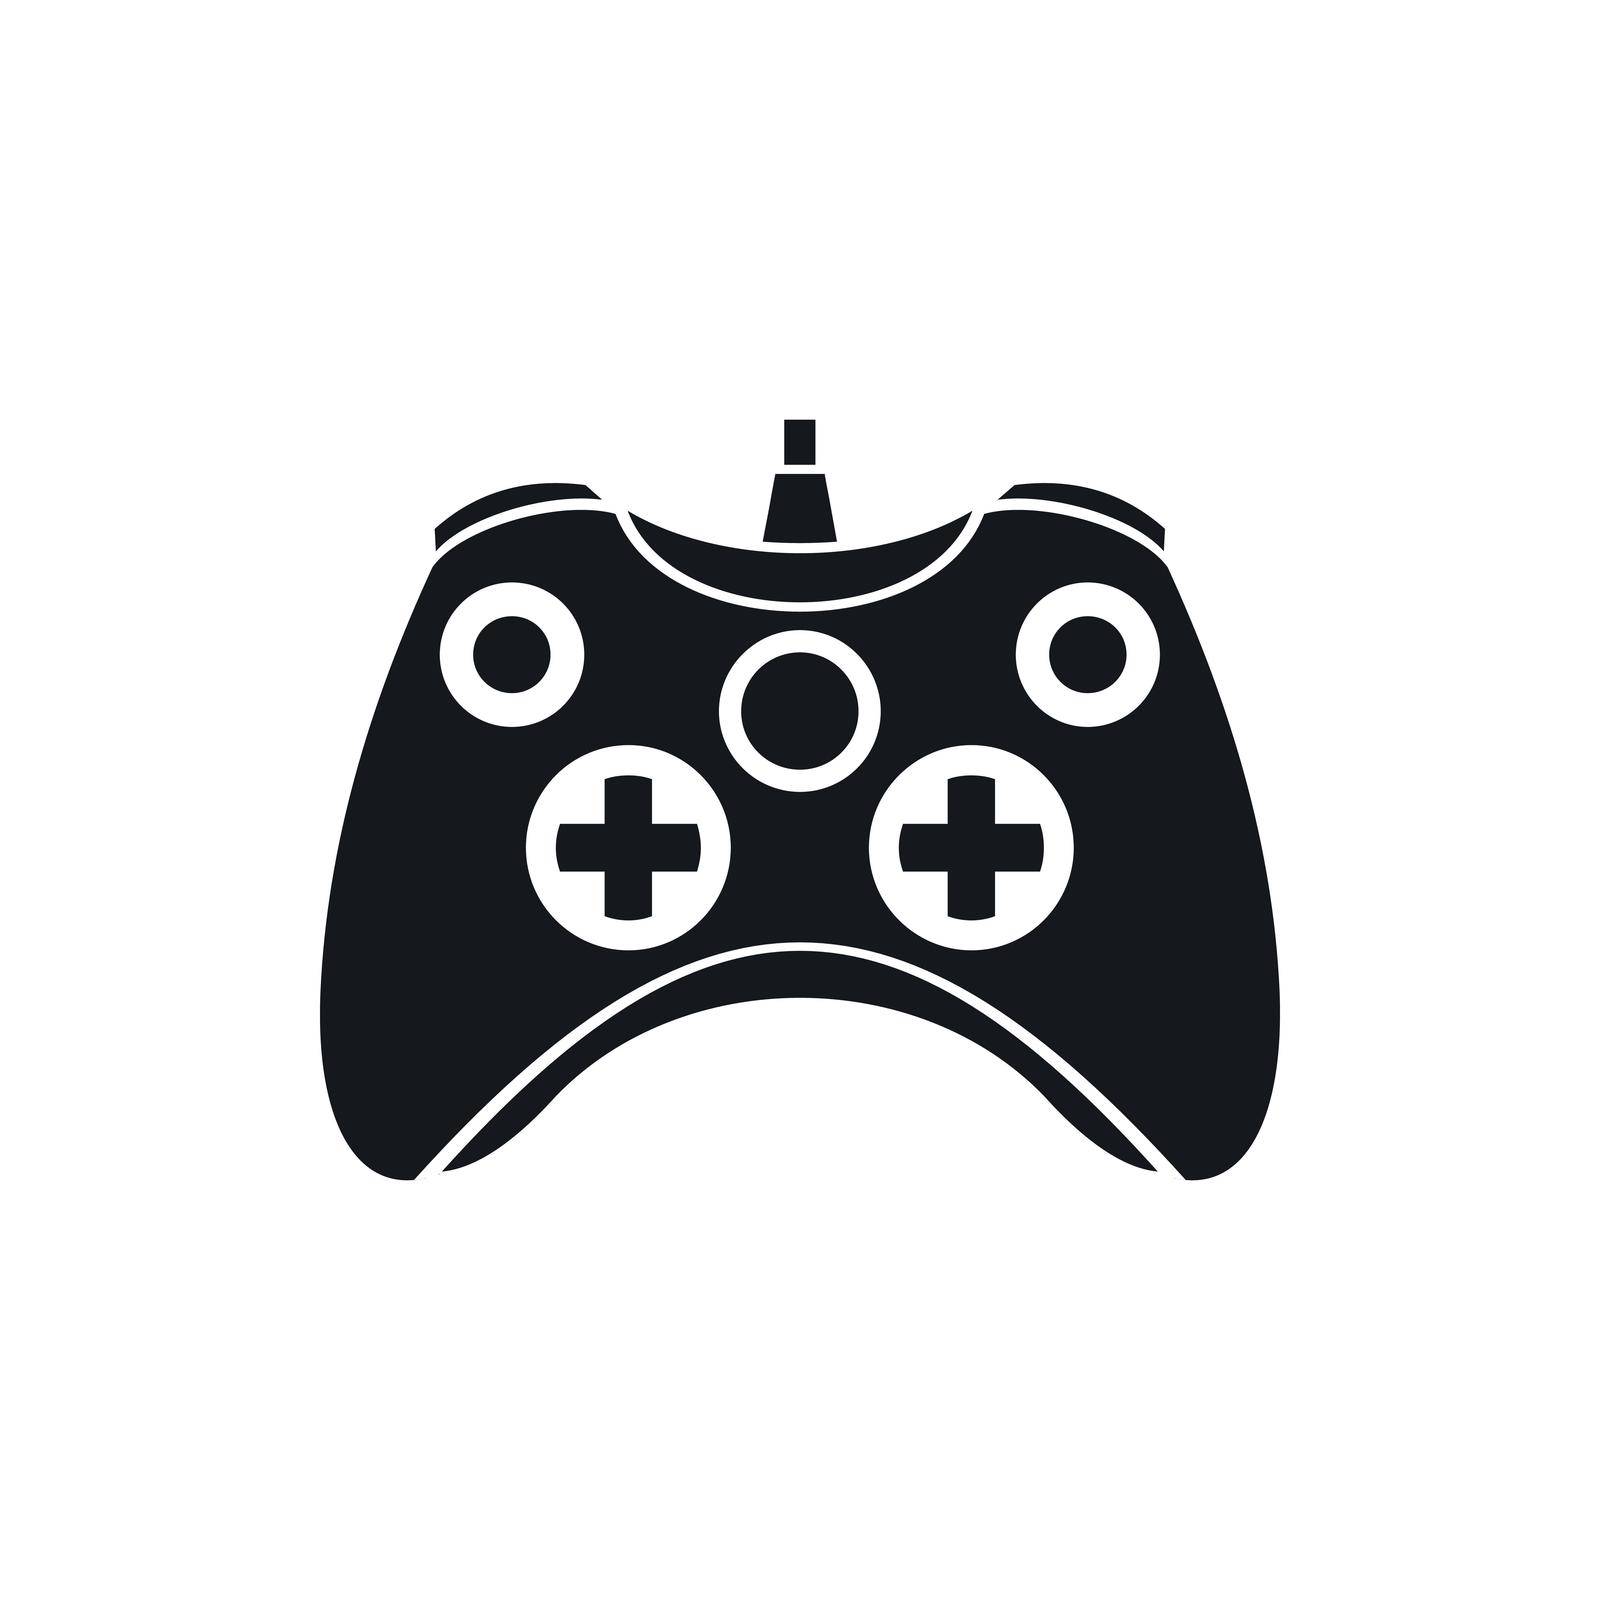 Video game controller icon in simple style on a white background